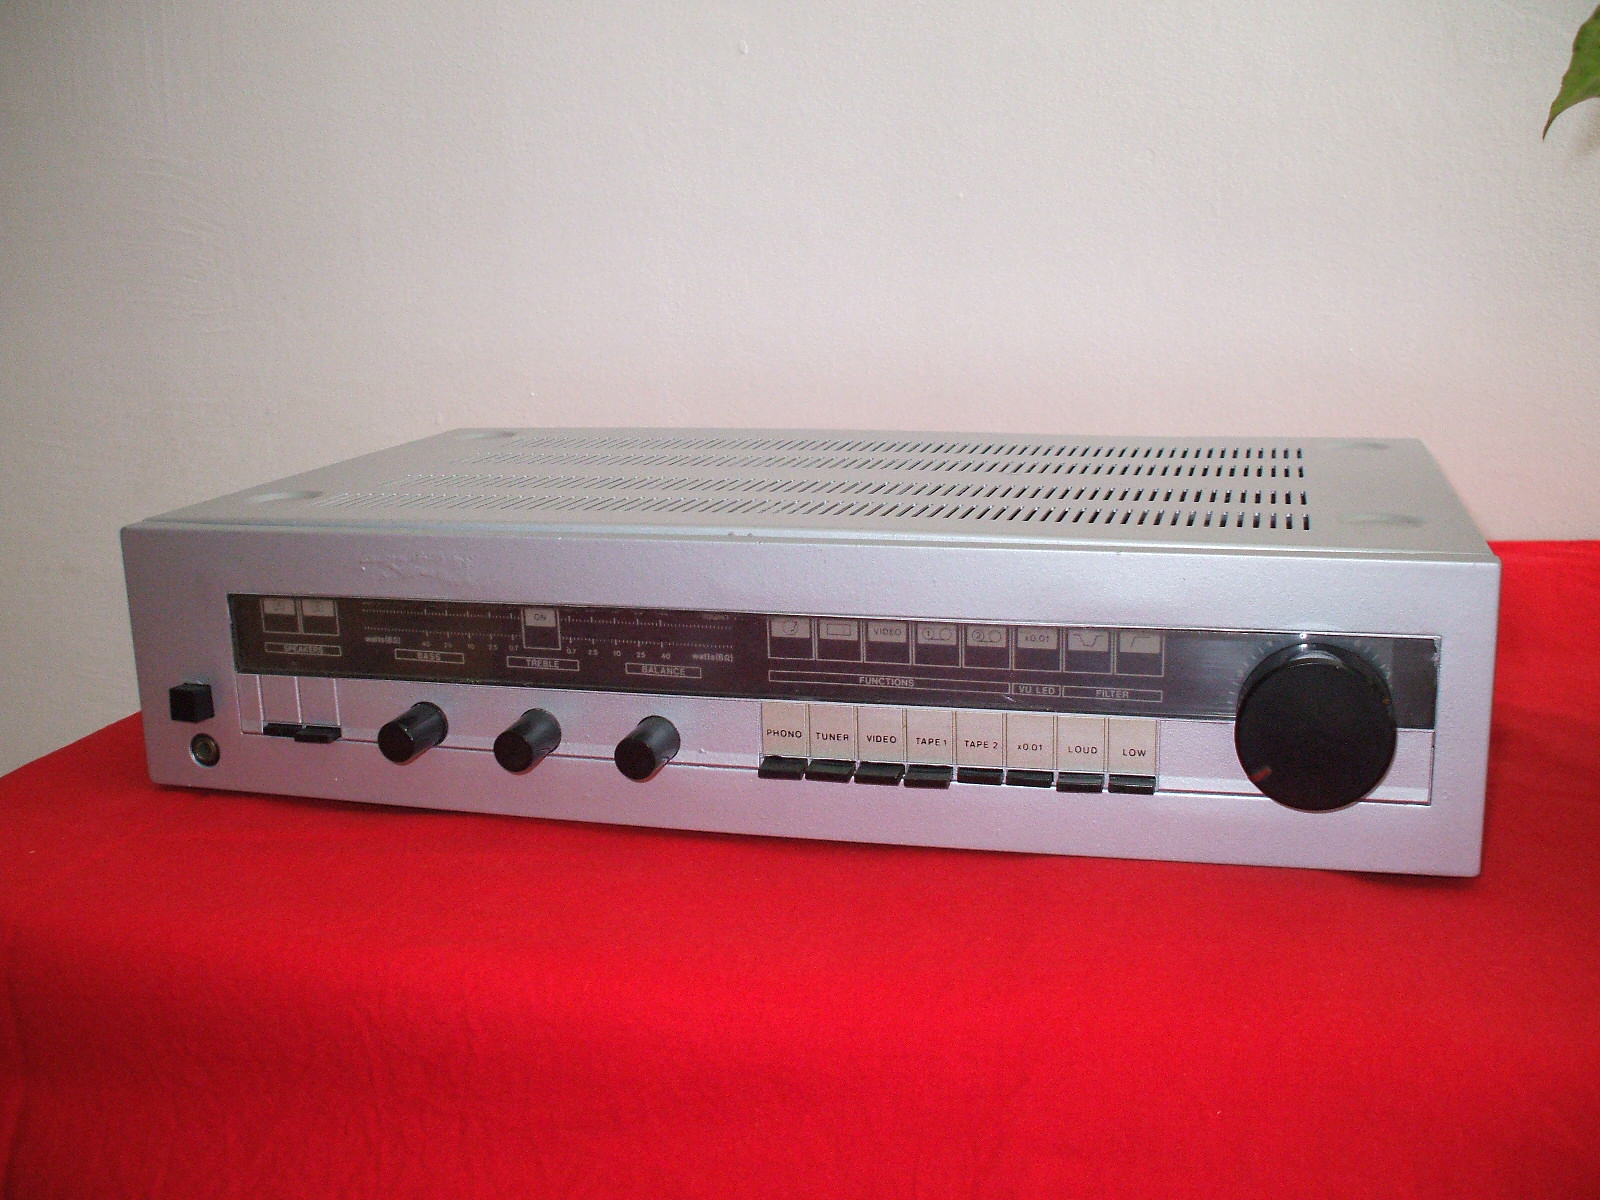 Amplificator AS 75202 2x75W ELECTROMURES